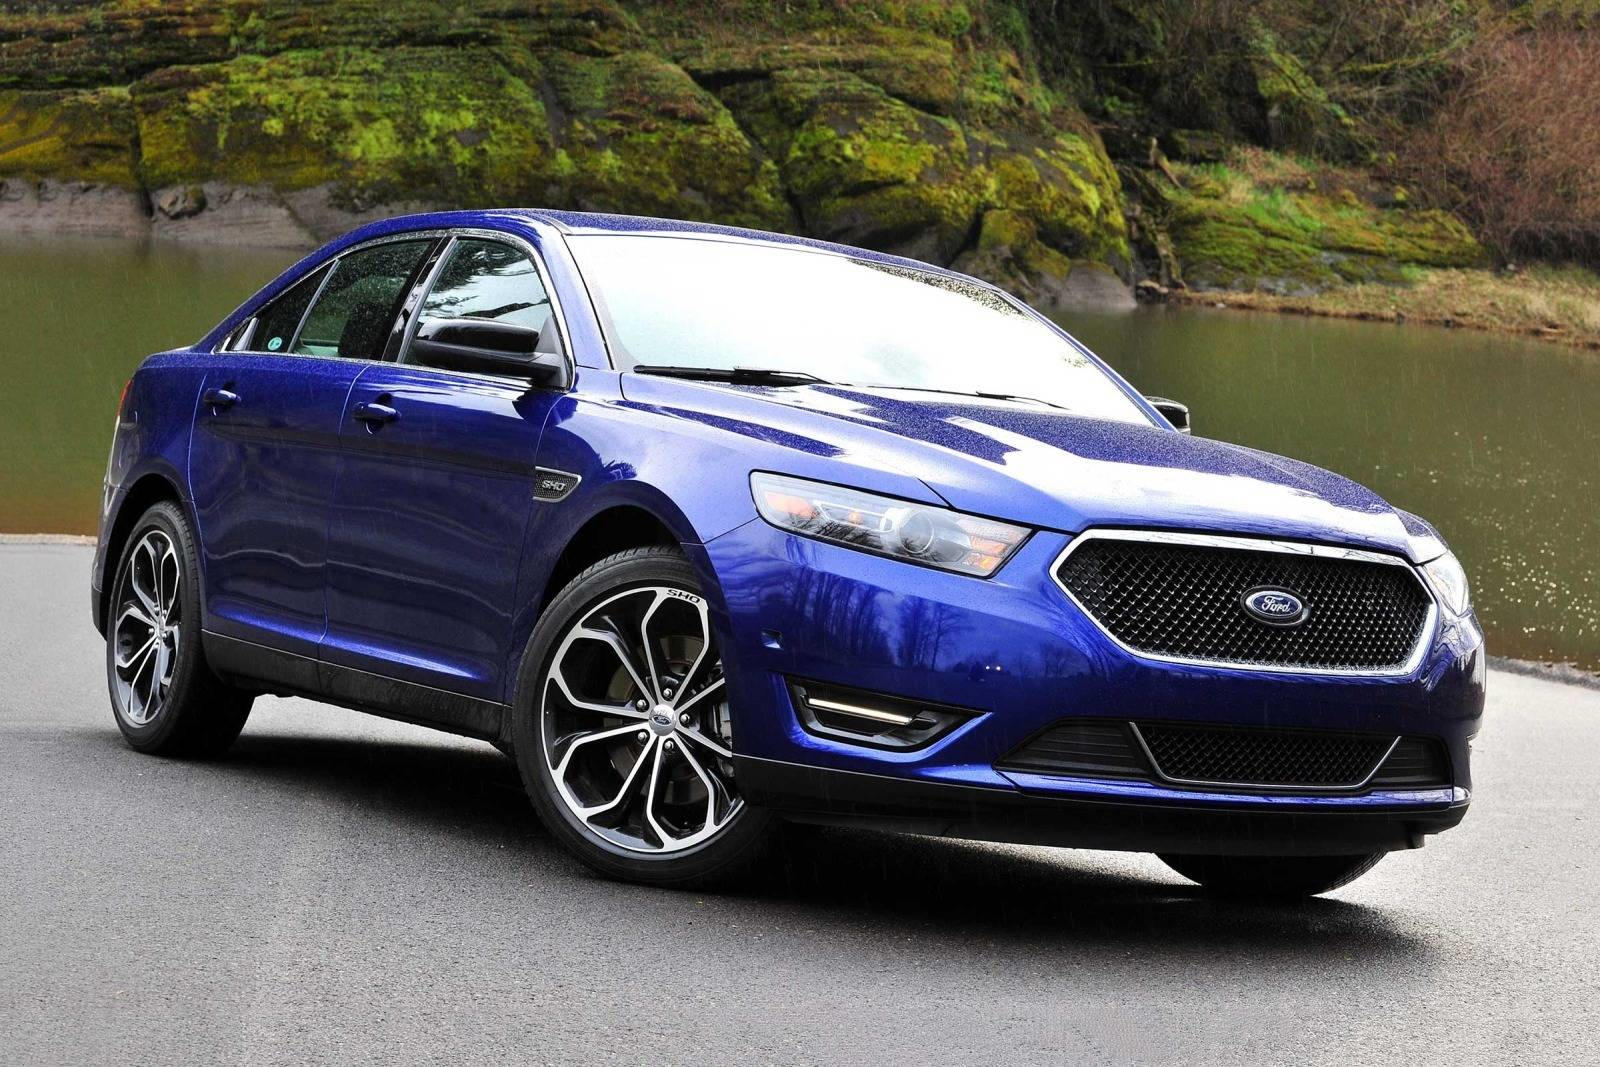 2019 Ford Taurus Review, Trims, Specs, Price, New Interior Features